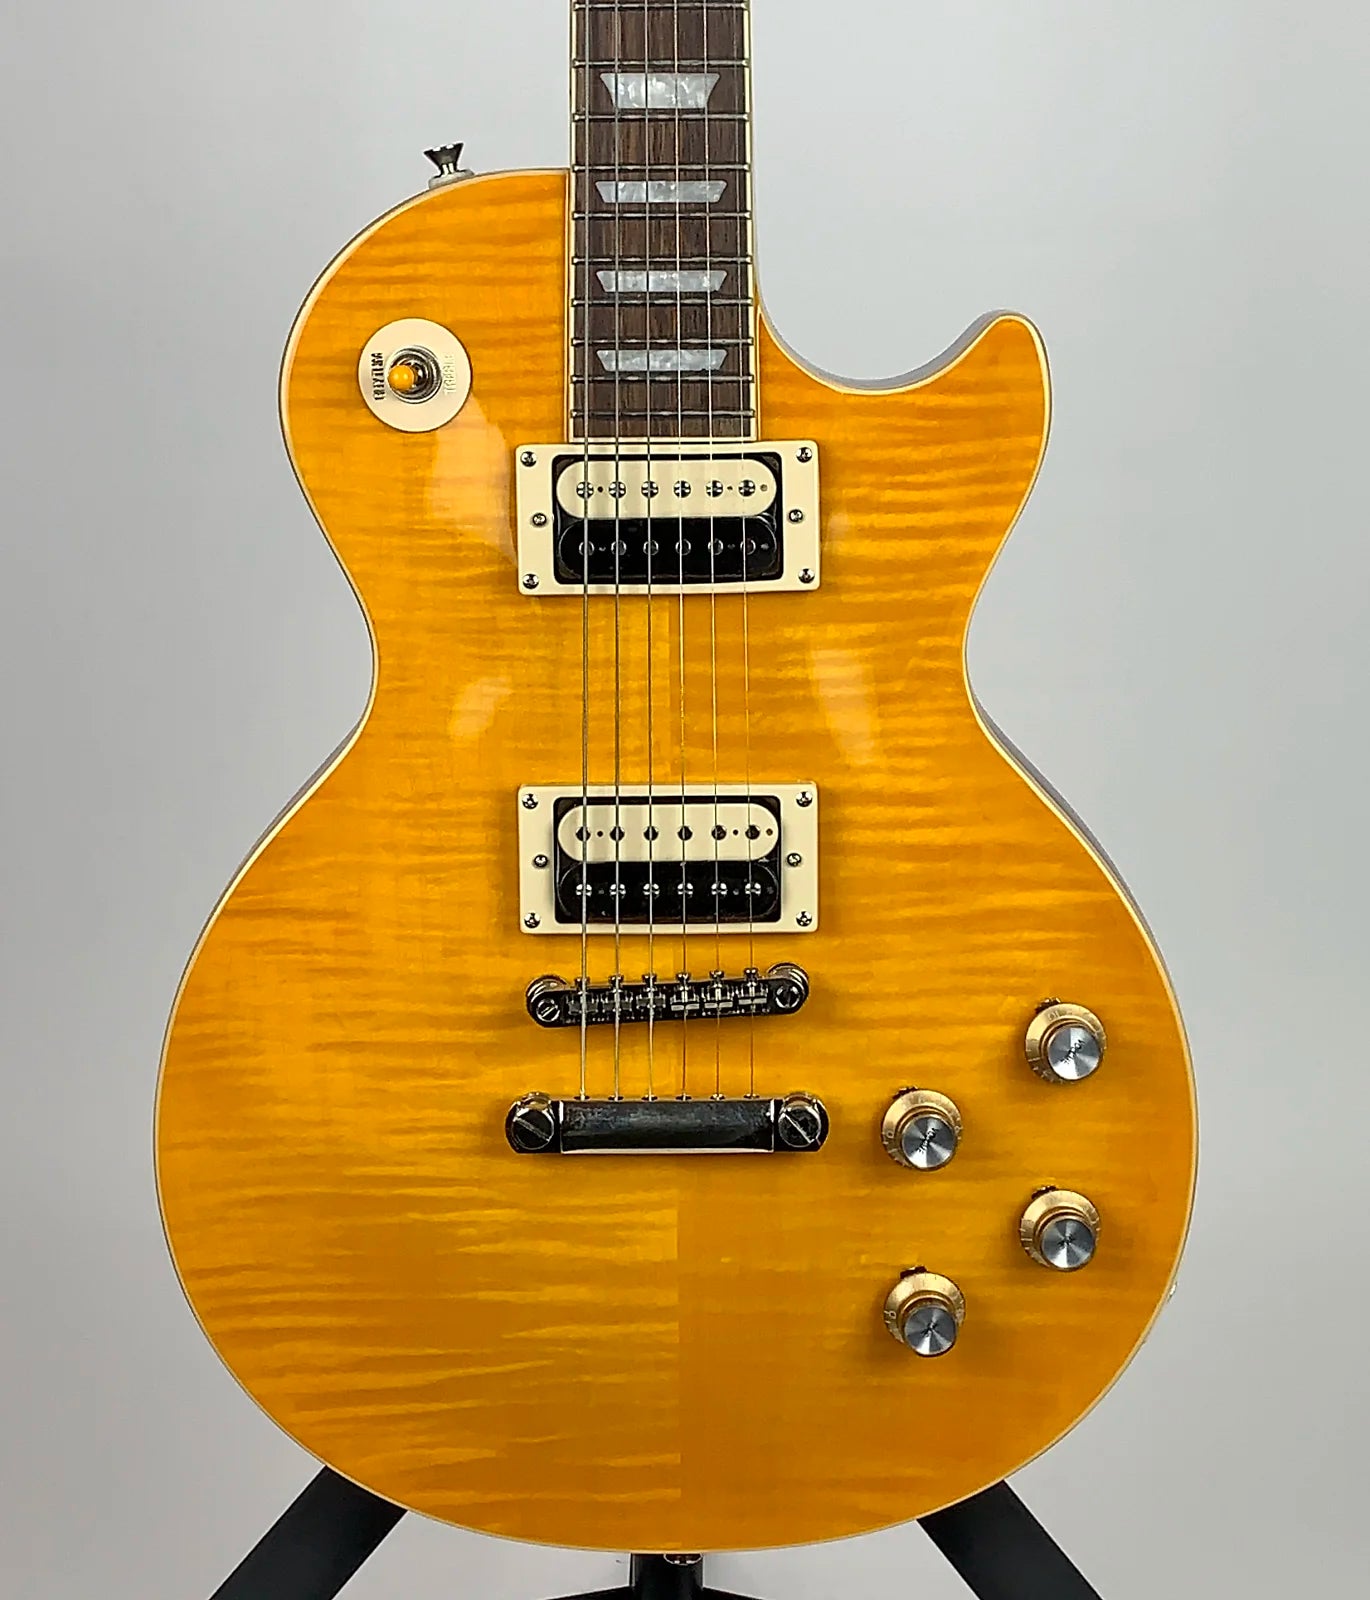 Epiphone Inspired By Gibson Slash Collection Les Paul Standard with Laurel Fingerboard - Appetite Burst